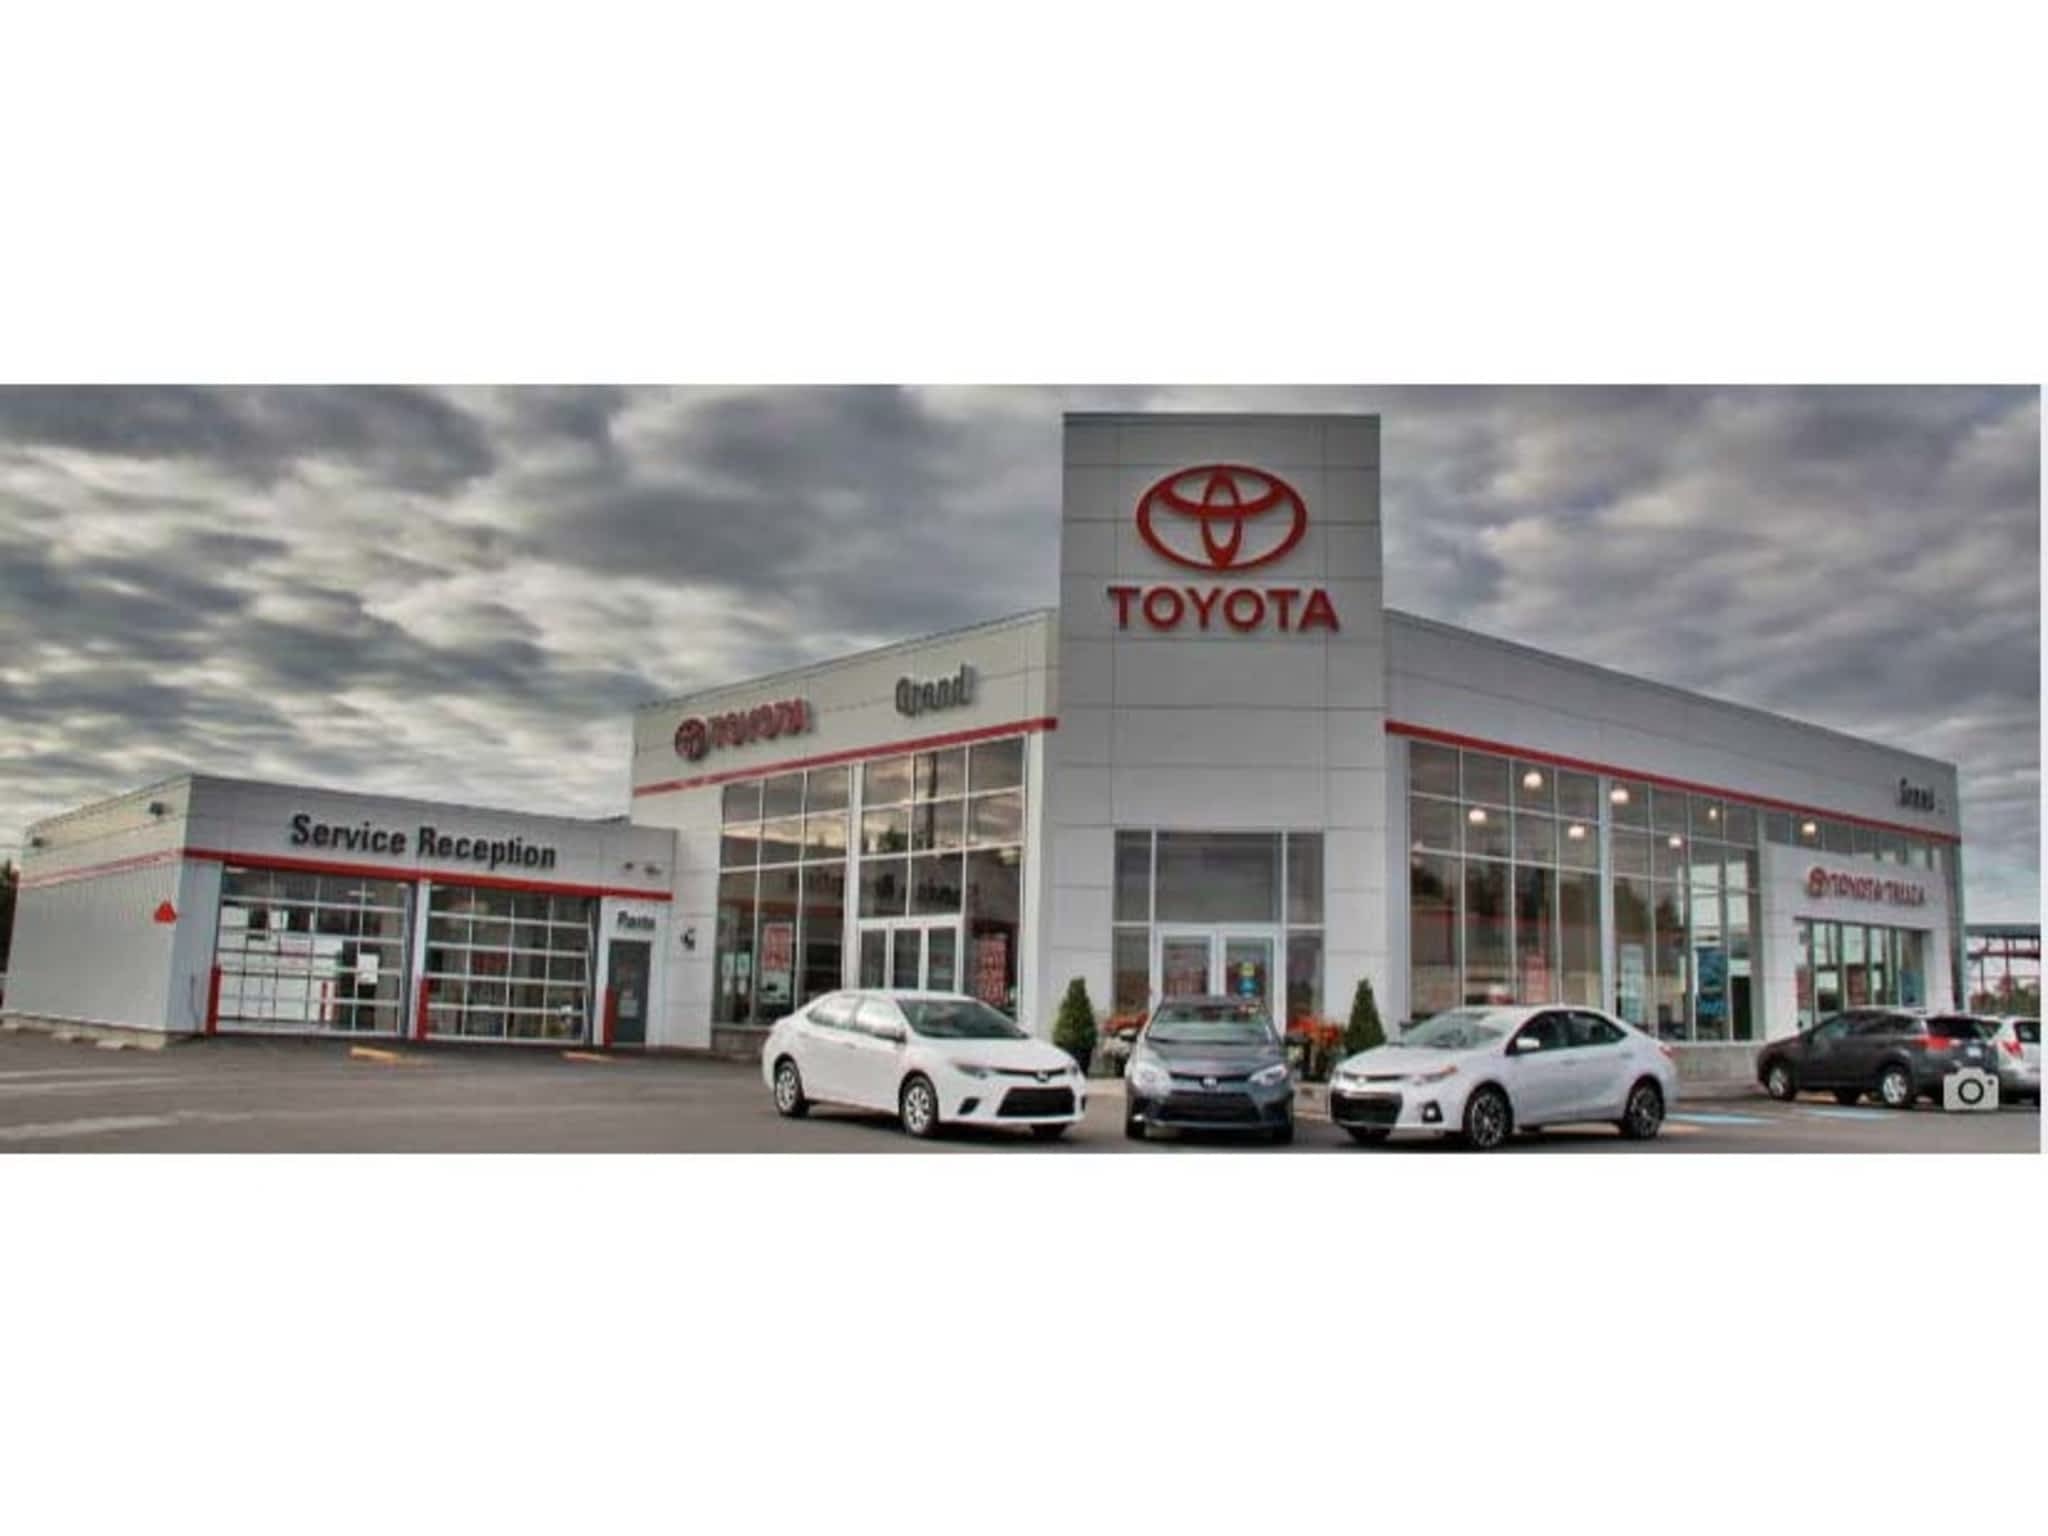 Grand Toyota - Grand Falls-Windsor, NL - Trans Canada Hwy | Canpages